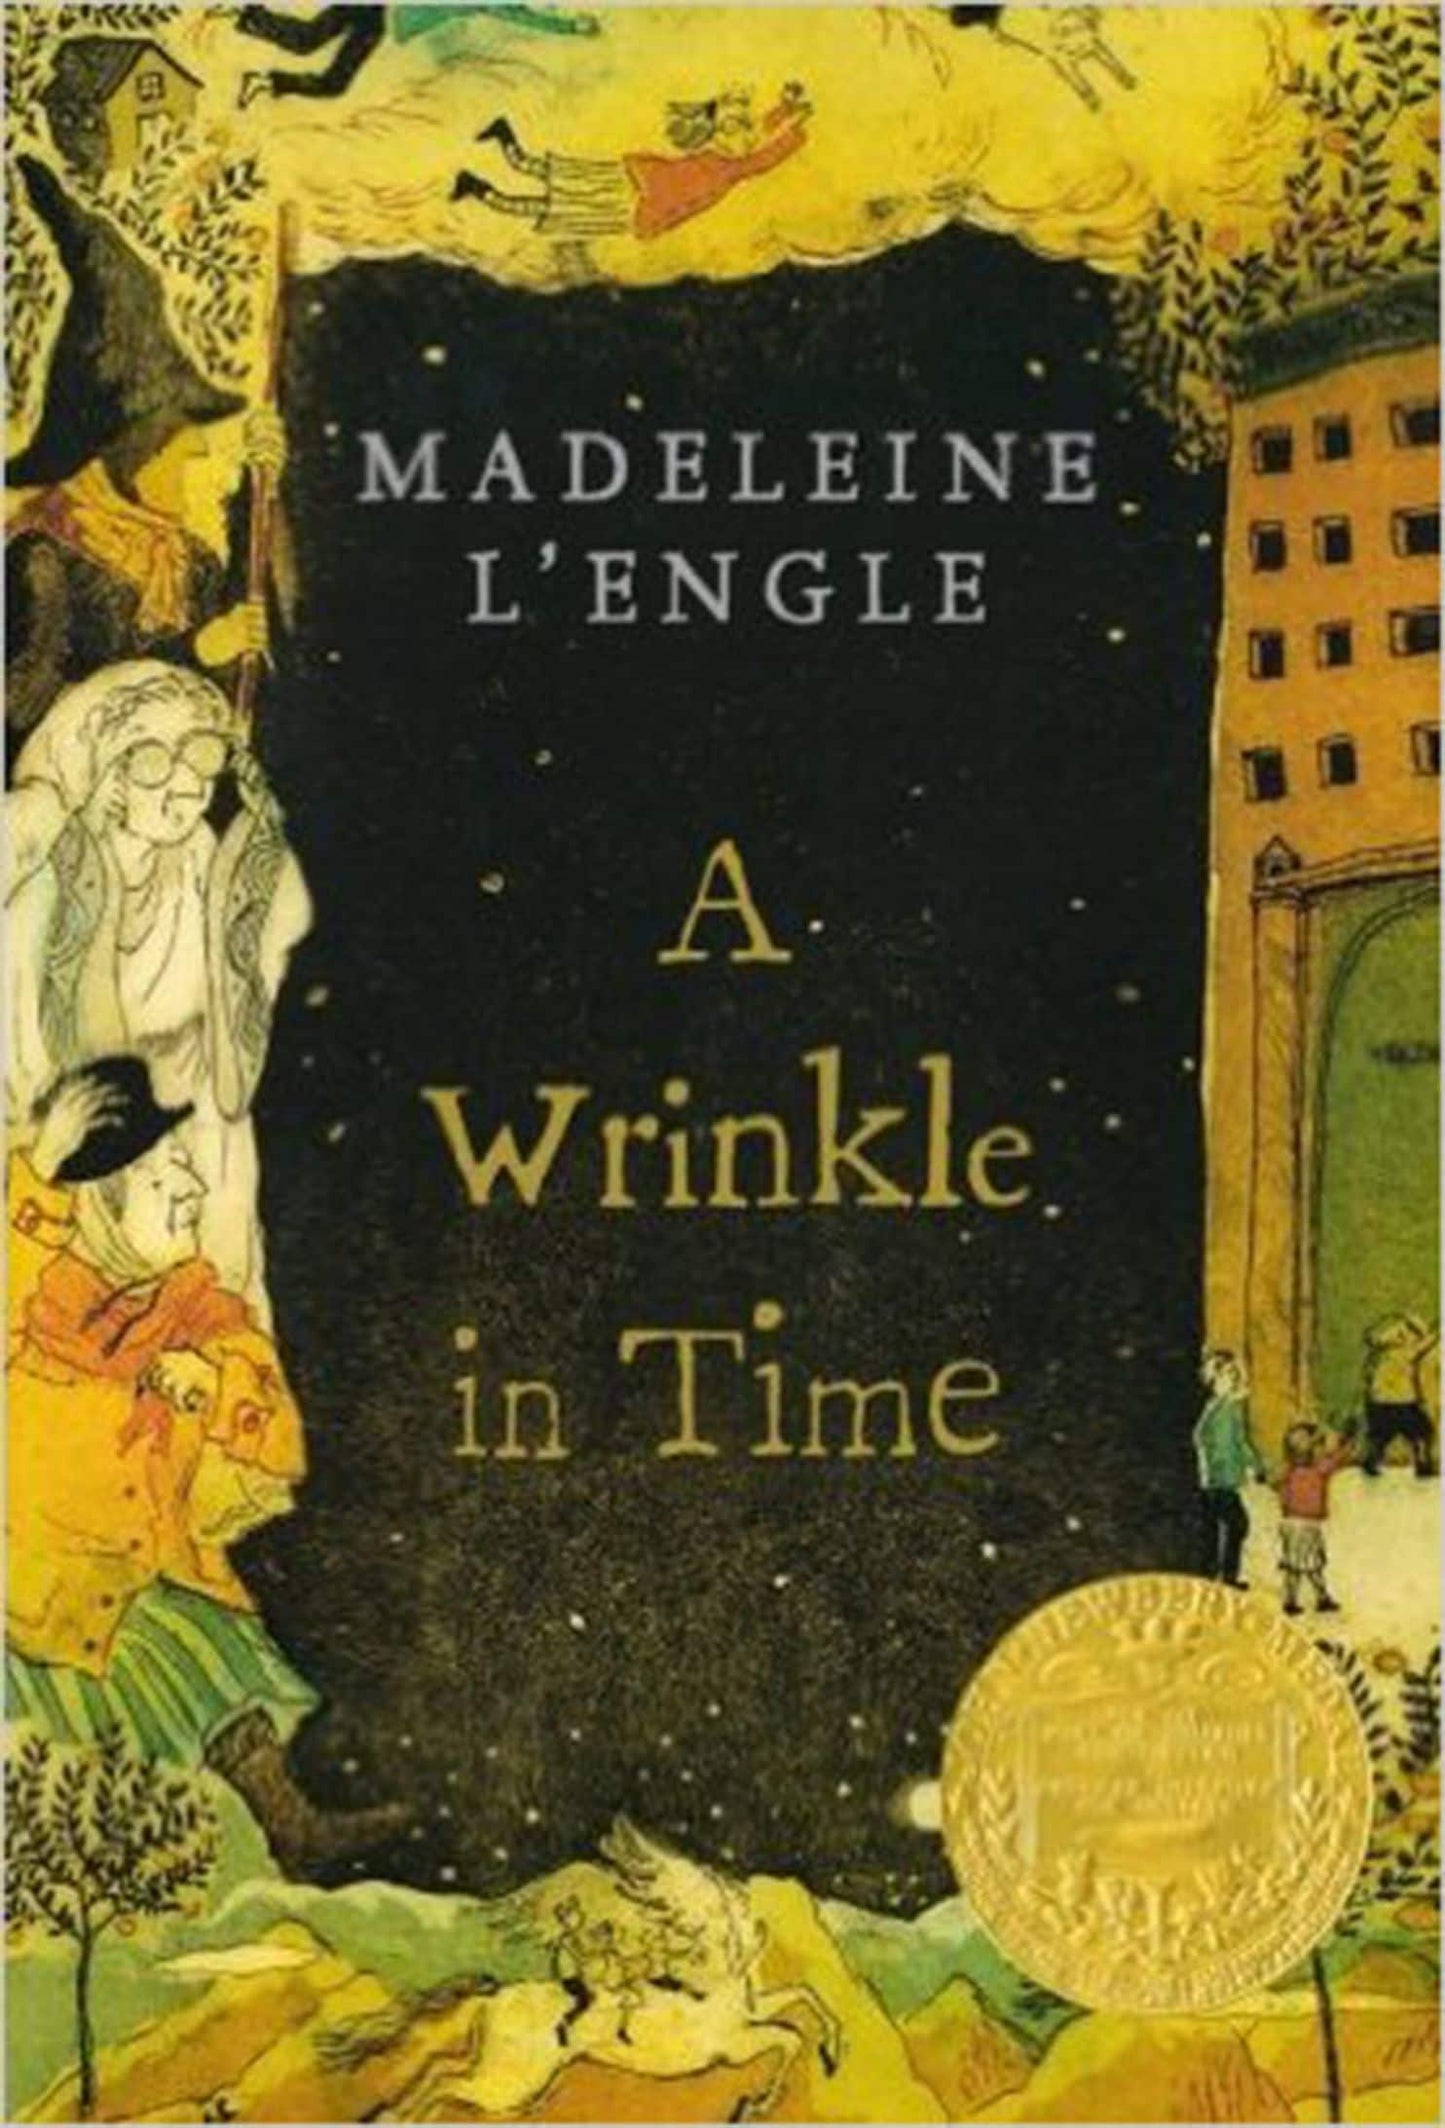 A Wrinkle in Time (Wrinkle in Time Quintet #1) - Madeleine L’Engle